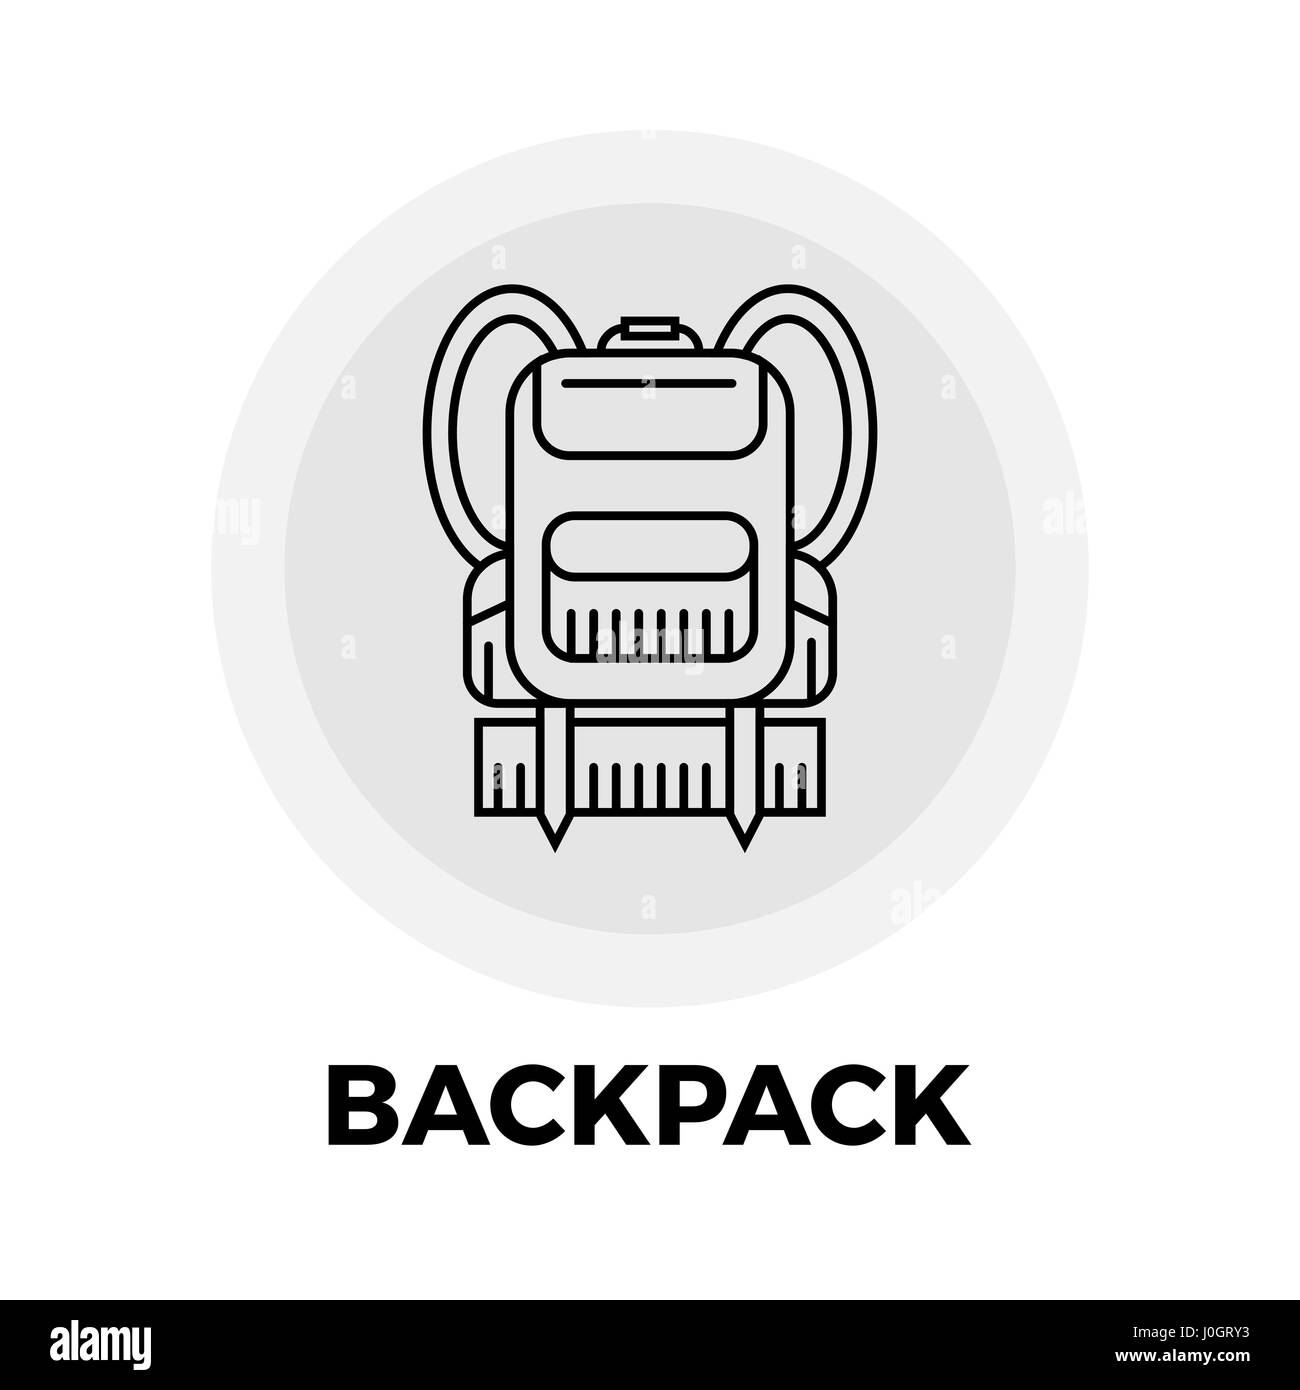 Backpack Icon Vector. Backpack Icon Flat. Backpack Icon Image. Backpack Icon Object. Backpack Line icon. Backpack Icon File. Backpack Icon JPG. Backpa Stock Vector